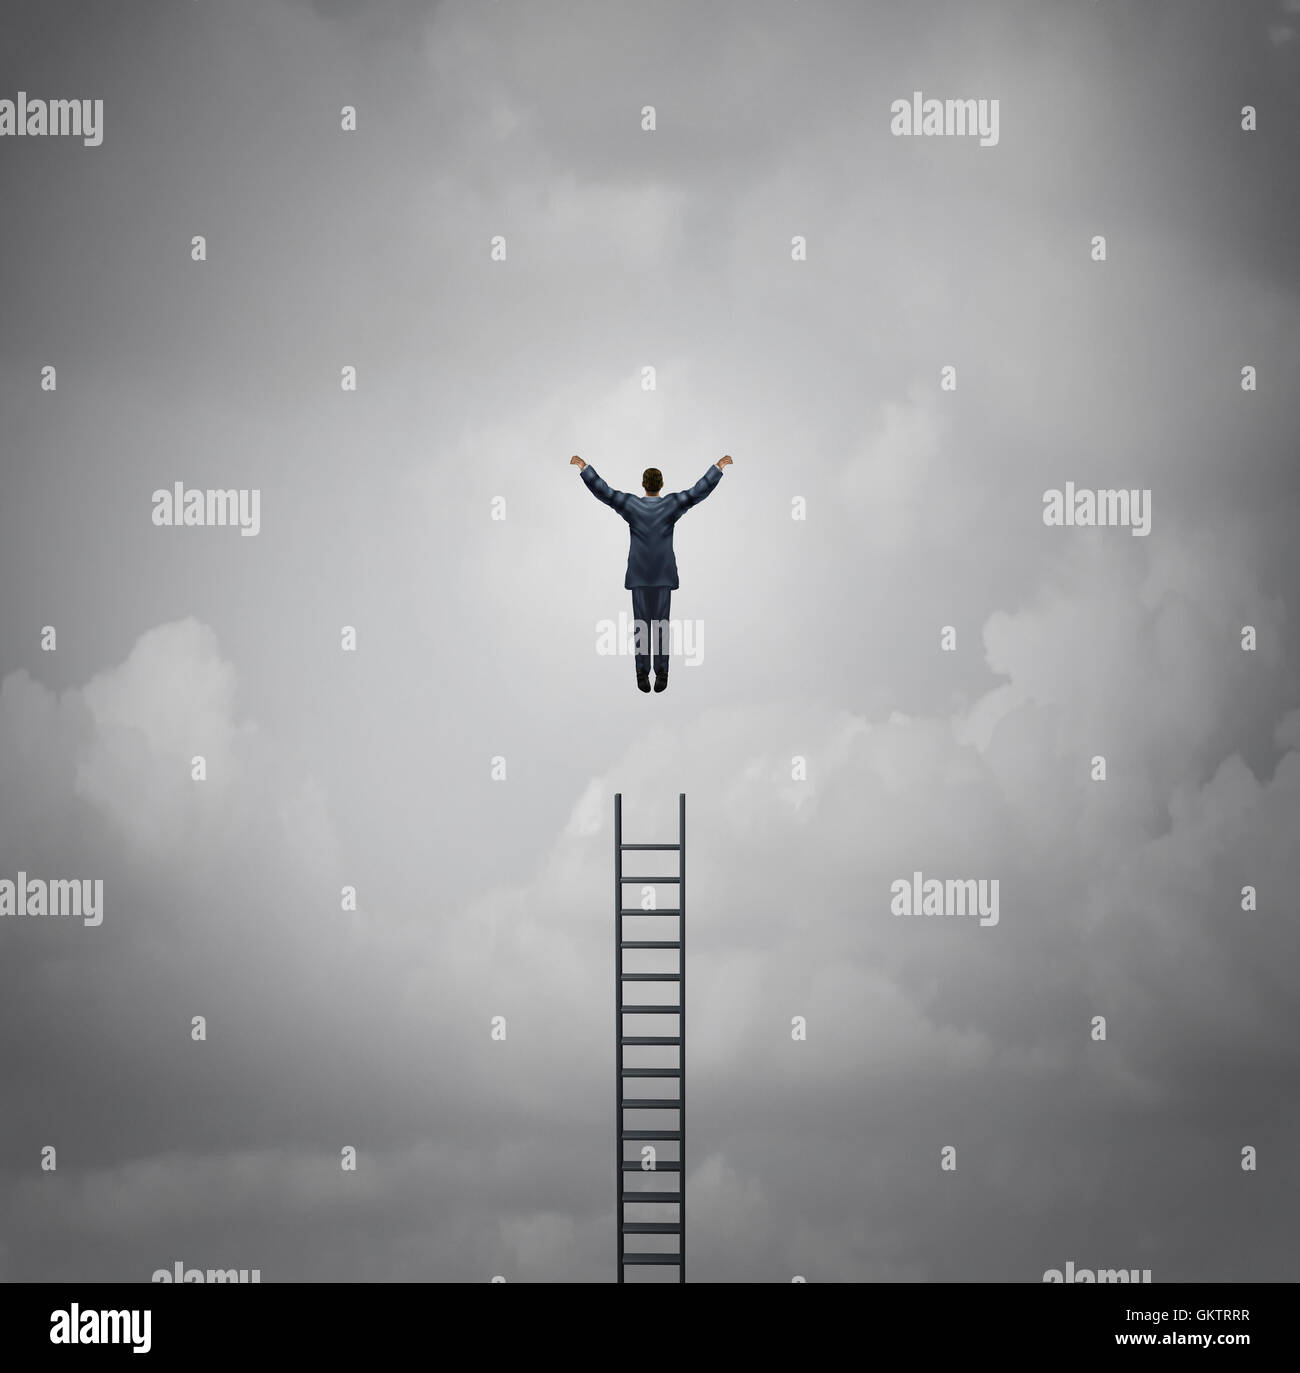 Business success motivation concept as a businessman levitating above a ladder as a leadership and growth metaphor with 3d illustration elements. Stock Photo